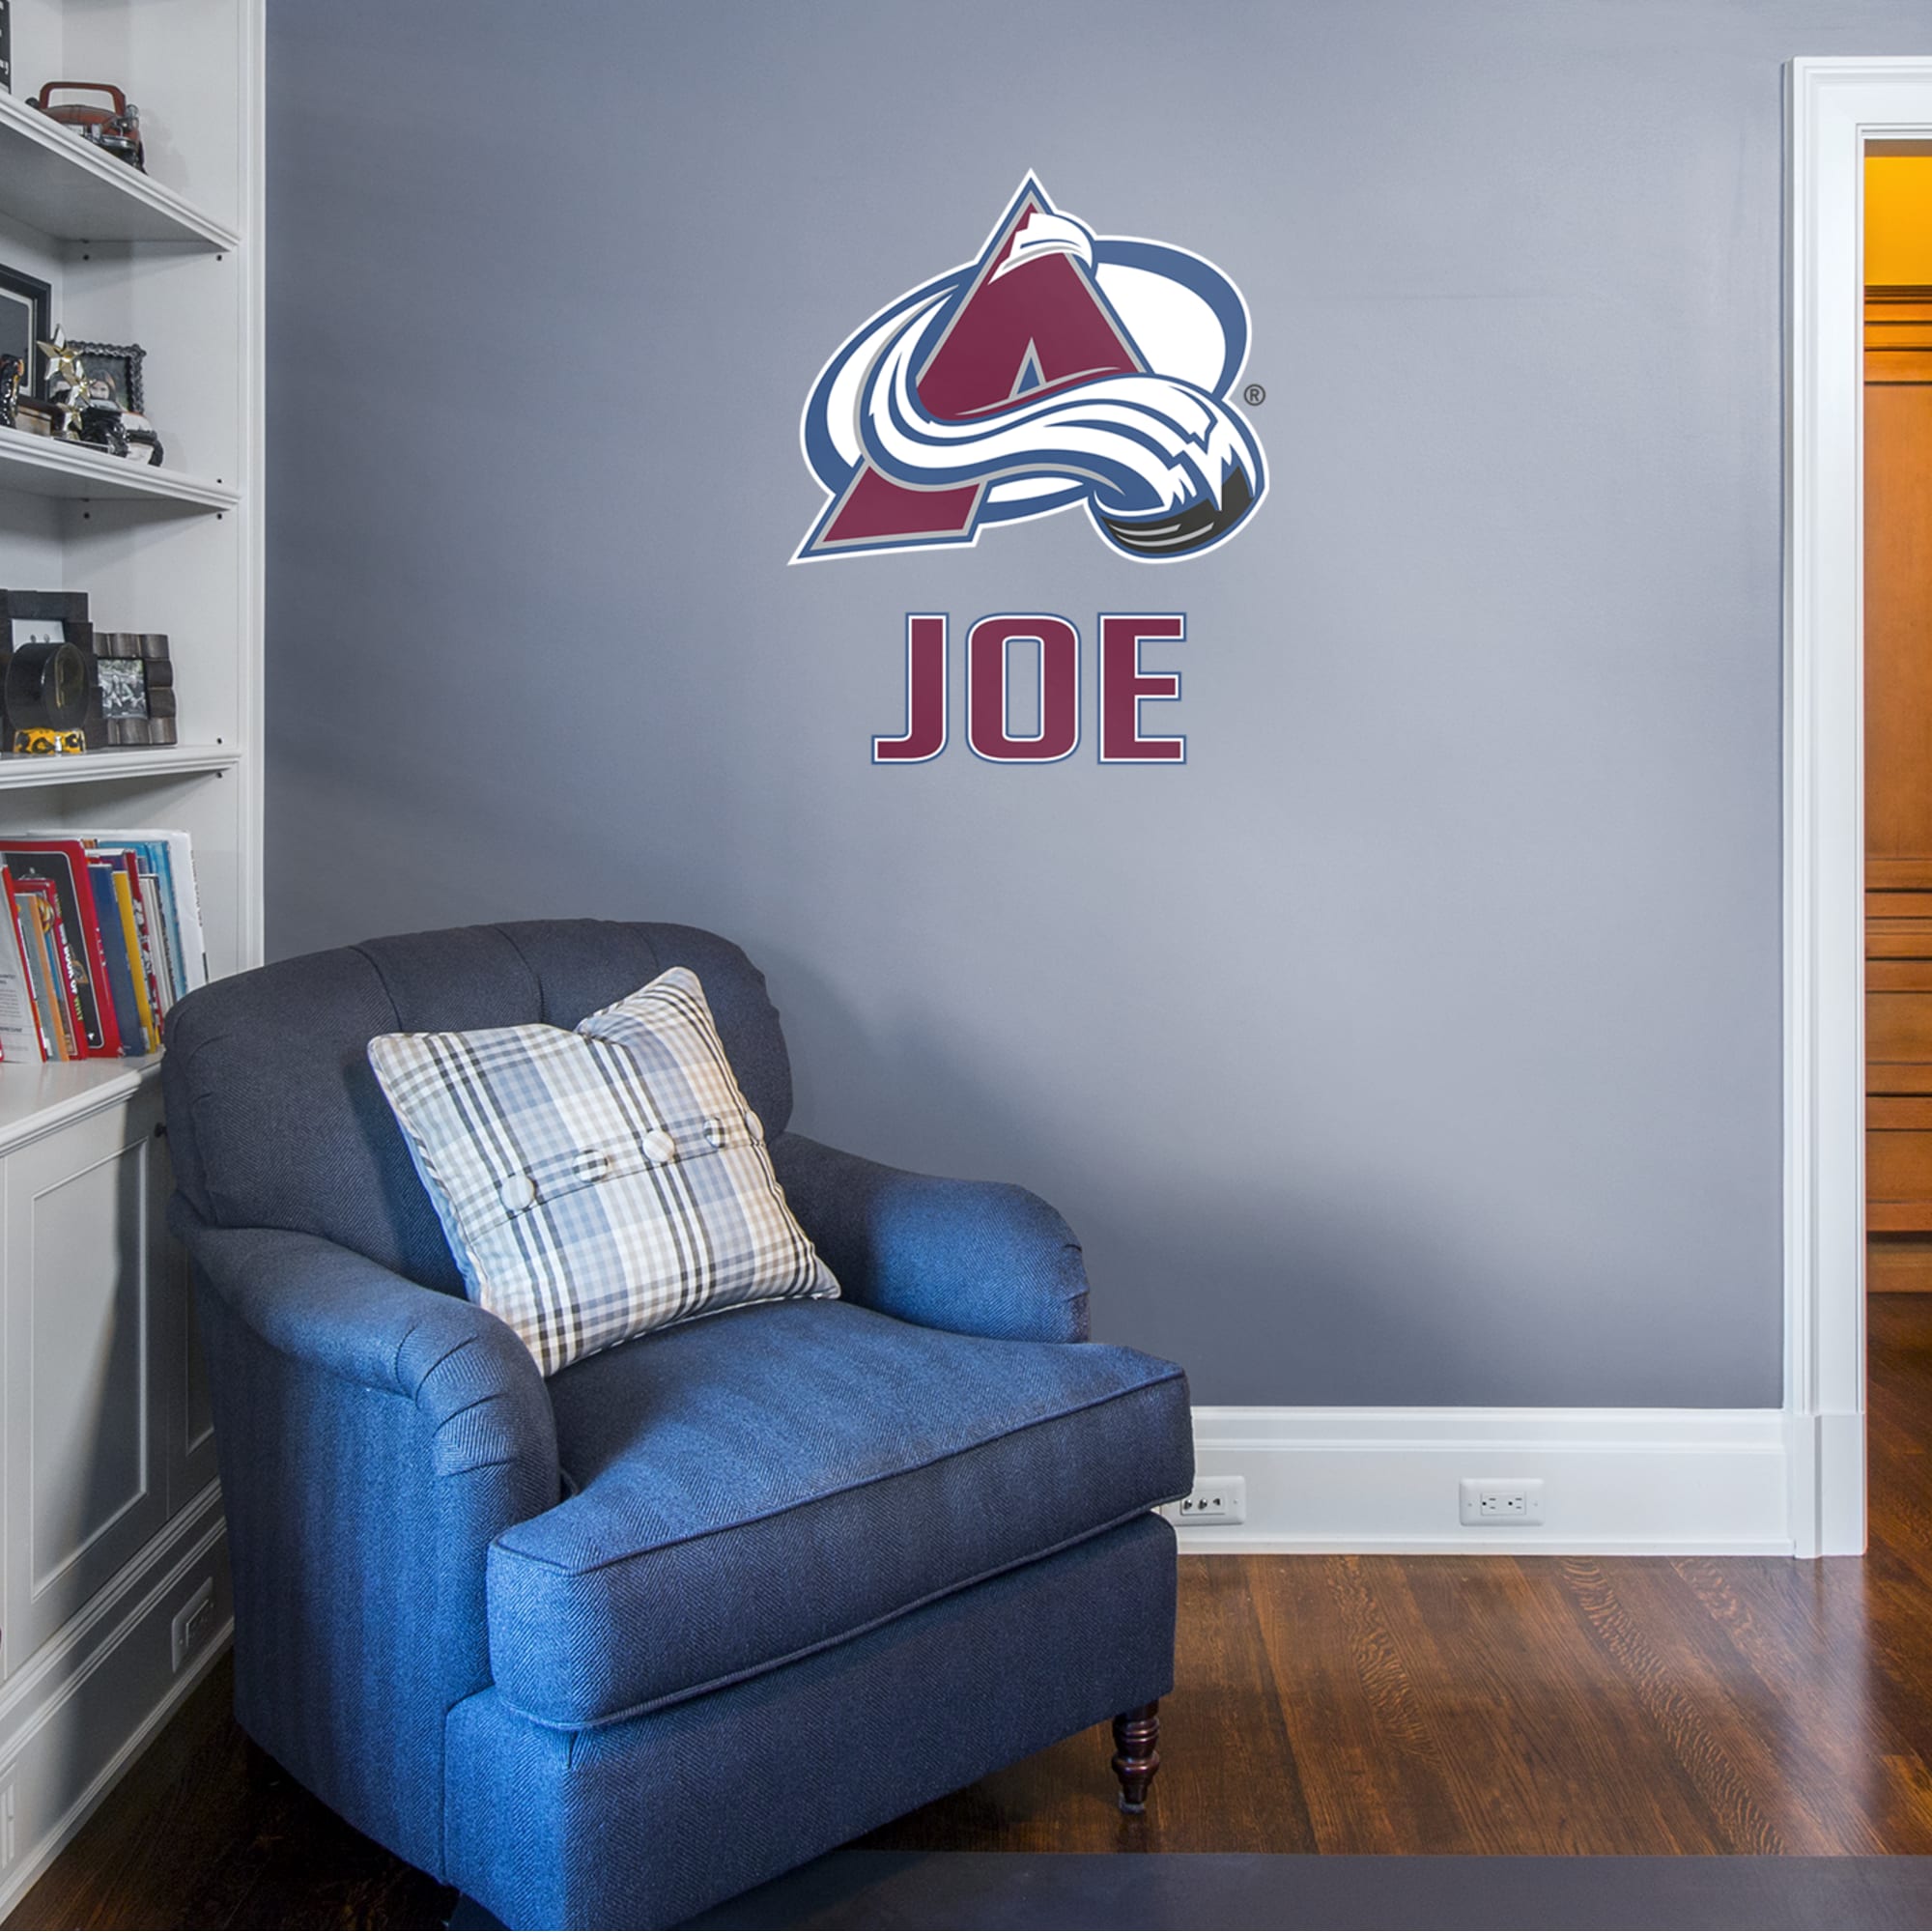 Colorado Avalanche: Stacked Personalized Name - Officially Licensed NHL Transfer Decal in Burgundy (39.5"W x 52"H) by Fathead |